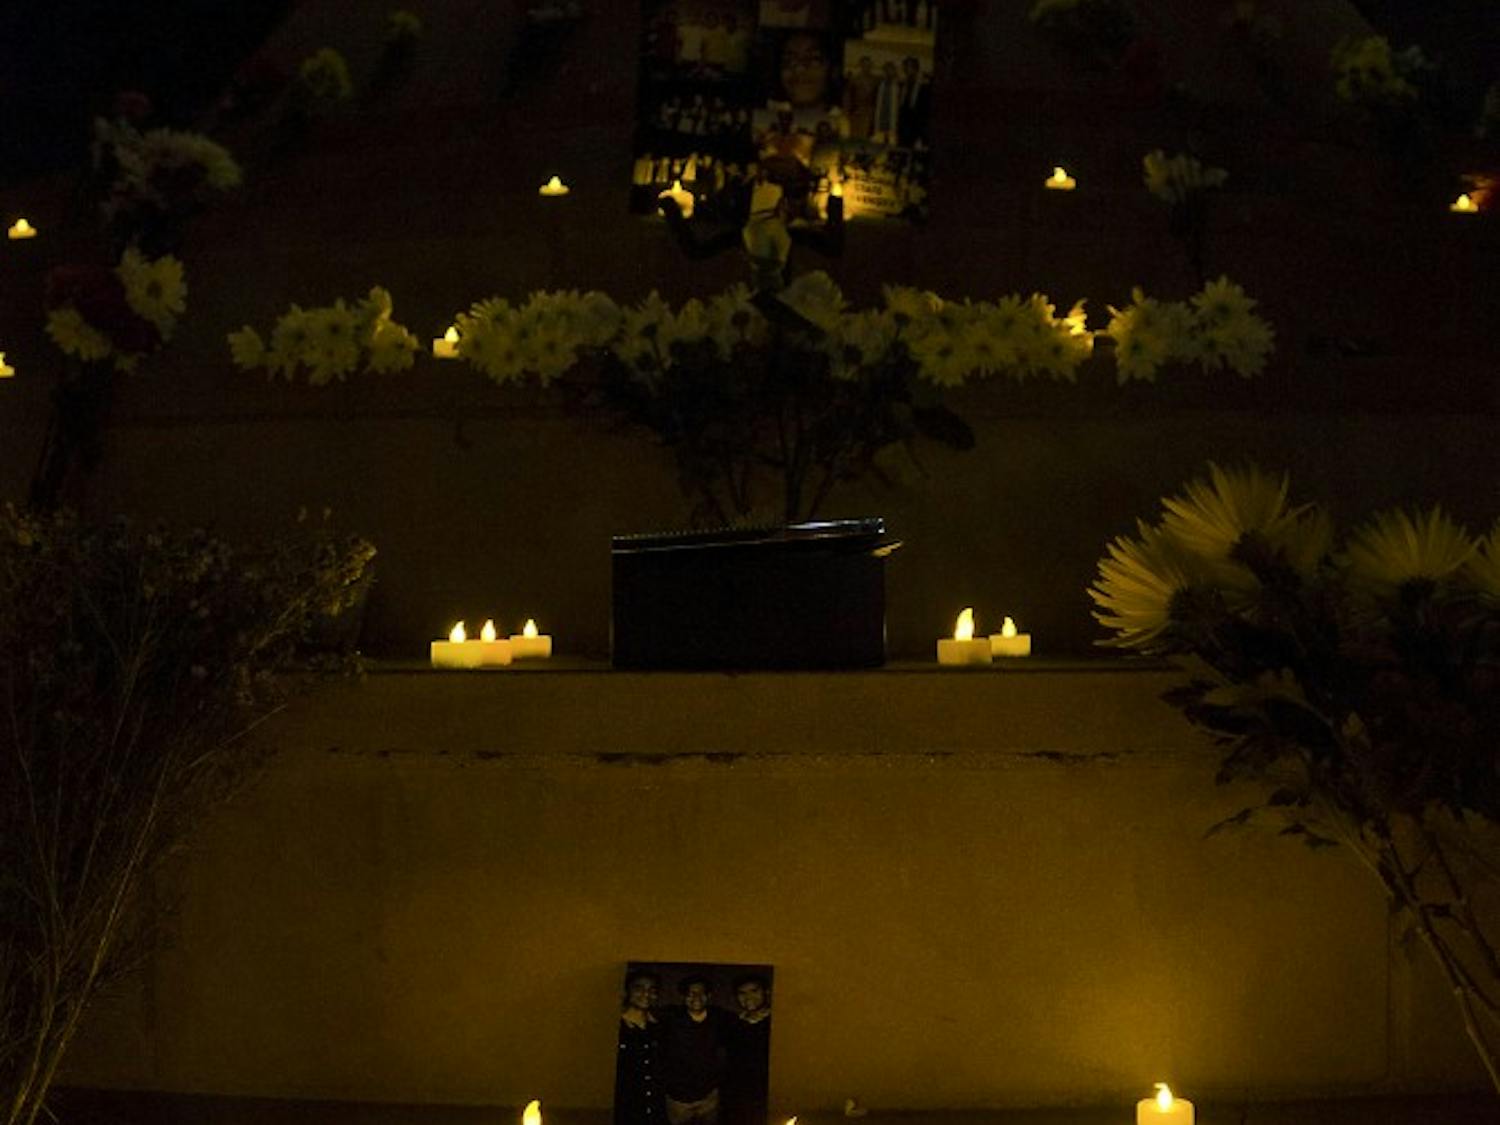 Friends and family lit candles during the vigil on Feb. 19, 2015, at Hayden Lawn in memory of an ASU student. (Shiva Balasubramanian/ The State Press)